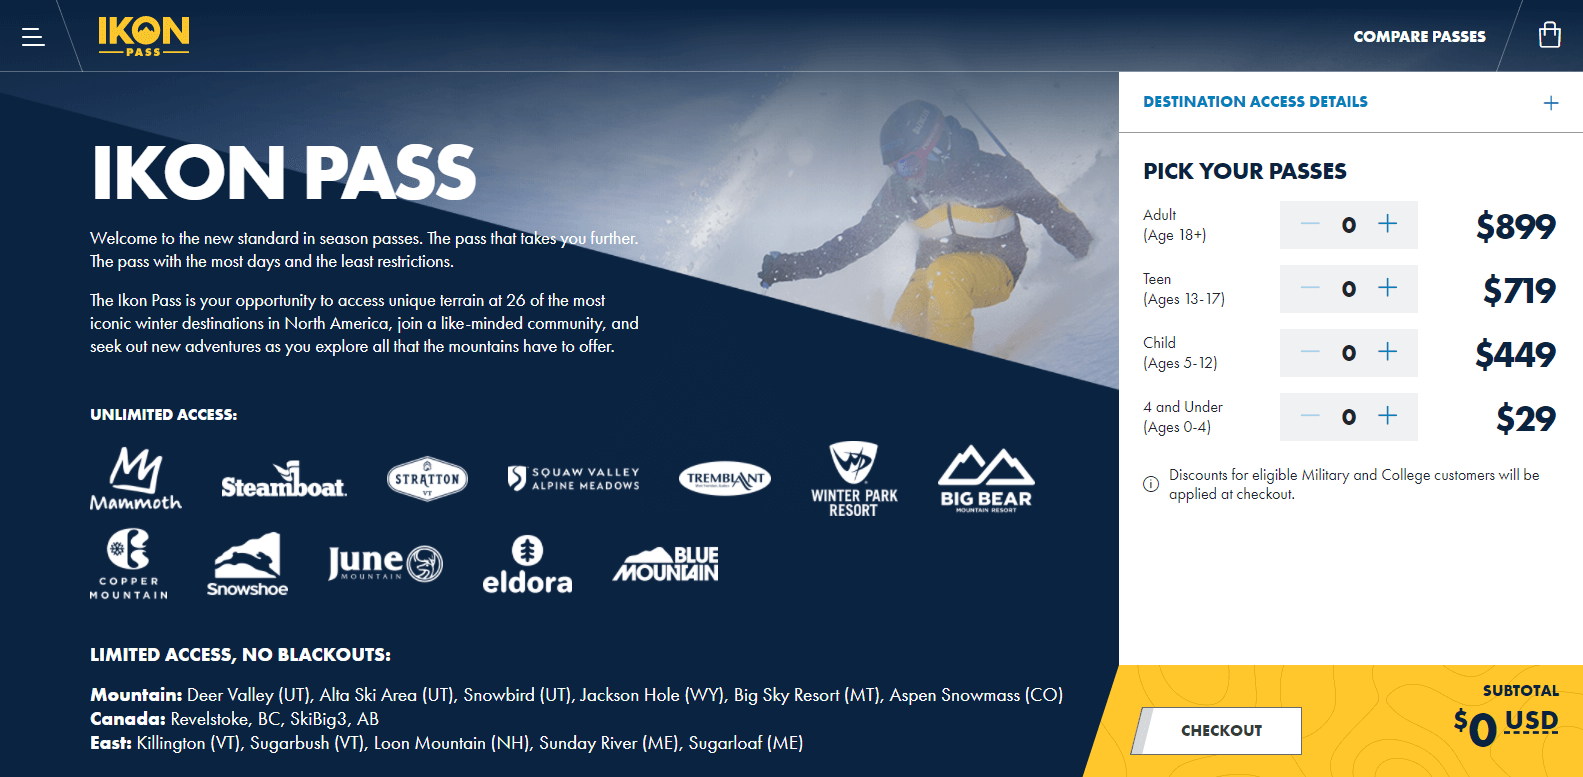 Ikon Pass marketing, branding, pricing, and timeline. SlopeFillers